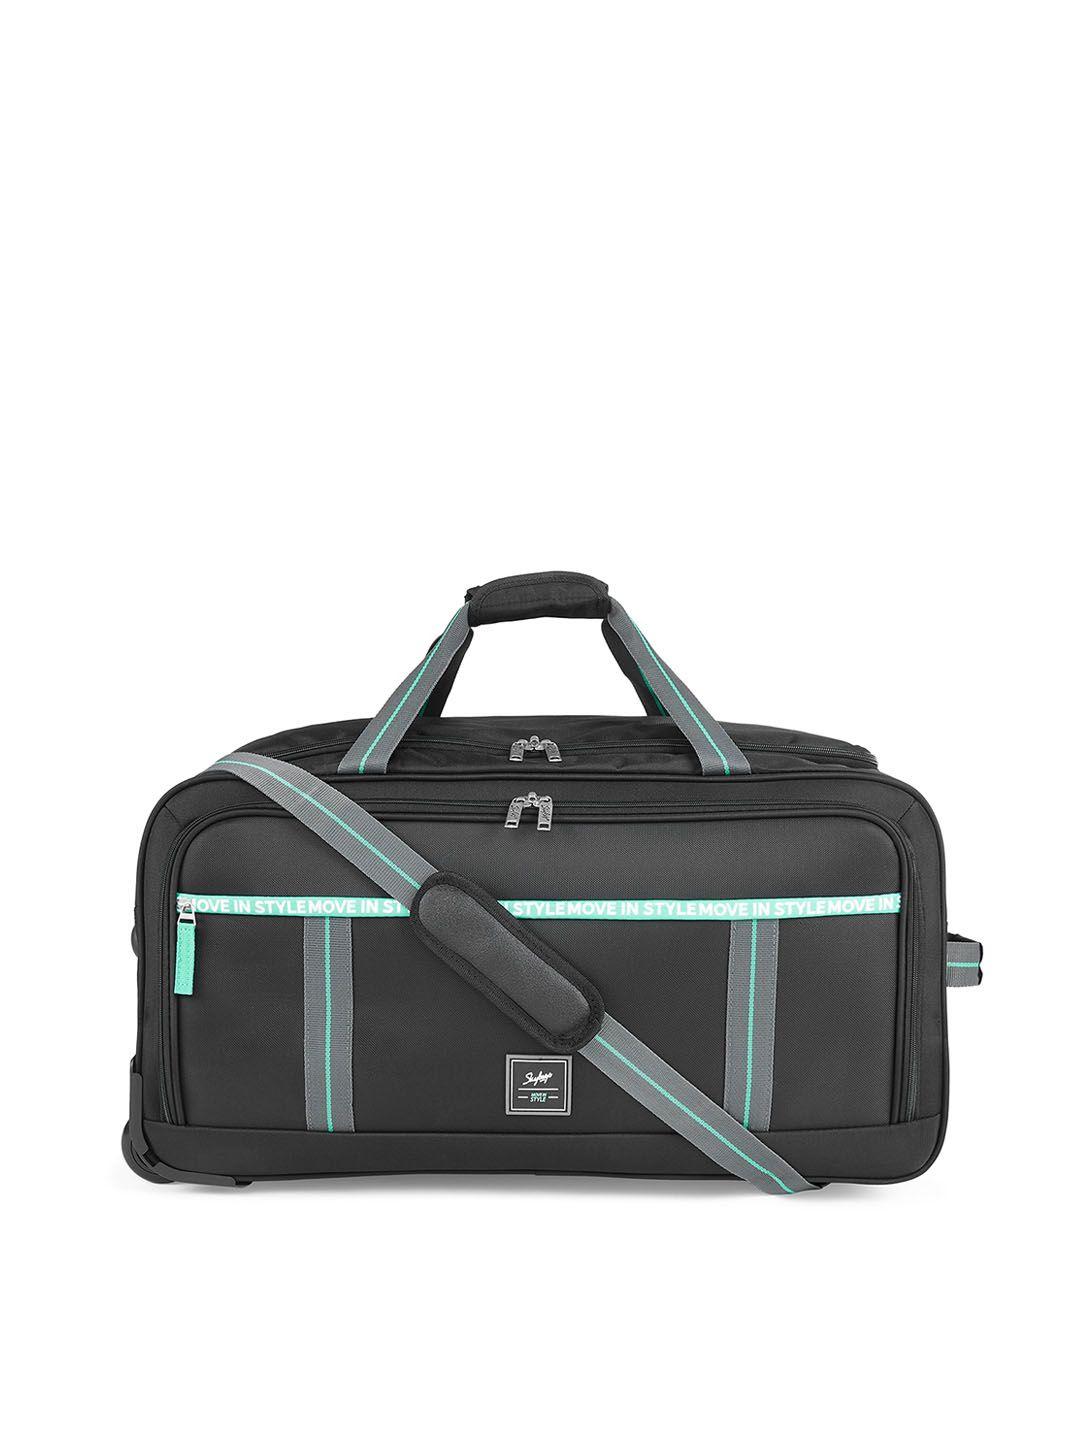 skybags large duffle bag